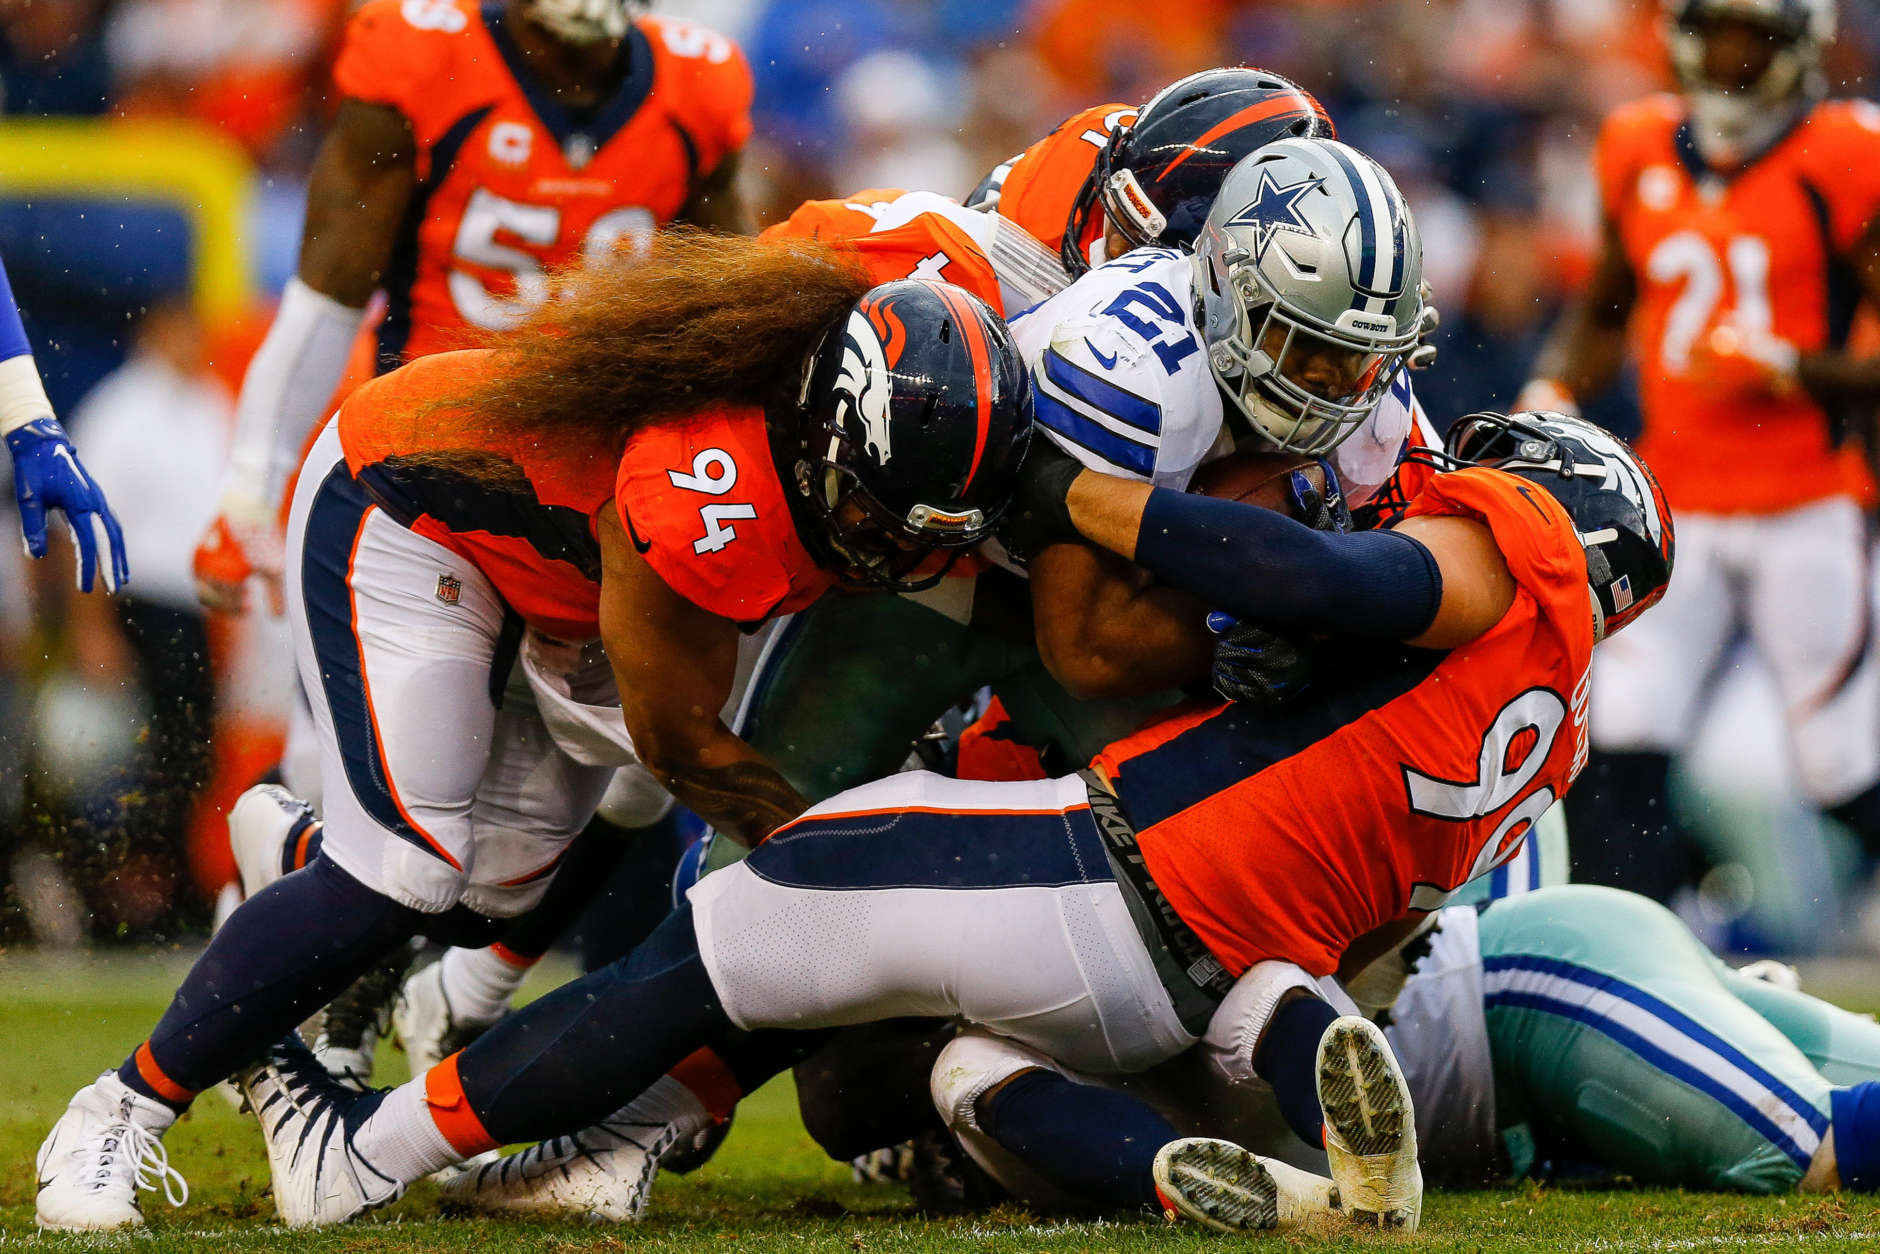 DENVER, CO - SEPTEMBER 17:  Nose tackle Domata Peko #94 and defensive tackle Adam Gotsis #99 of the Denver Broncos tackle running back Ezekiel Elliott #21 of the Dallas Cowboys in the first half at Sports Authority Field at Mile High on September 17, 2017 in Denver, Colorado. (Photo by Justin Edmonds/Getty Images)